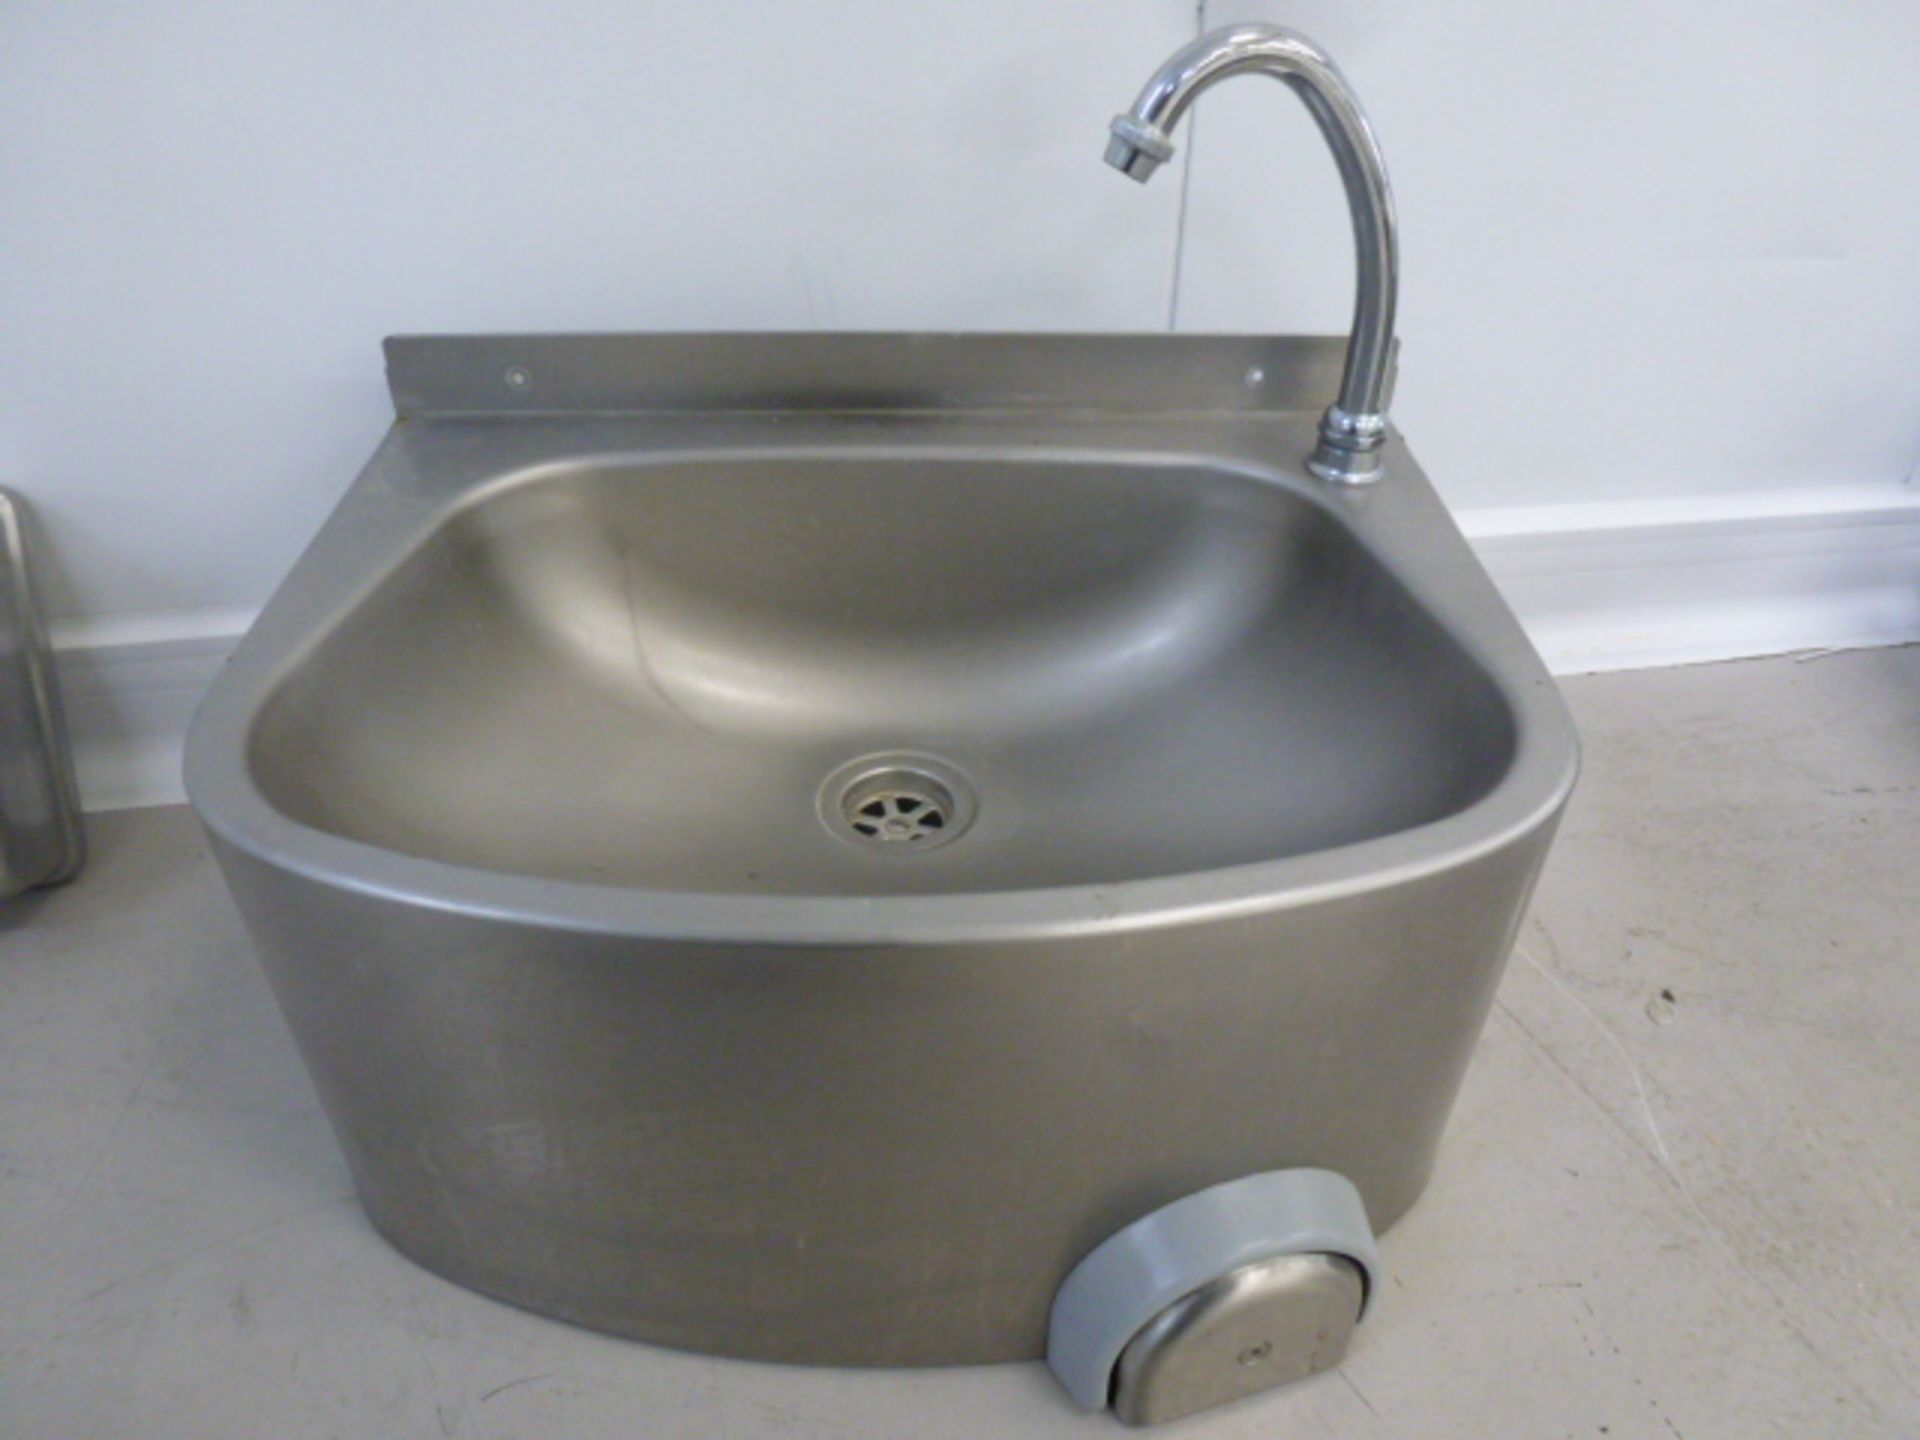 Stainless Steel Knee Operated Hand Wash Basin with Soap Dispenser. - Bild 2 aus 3